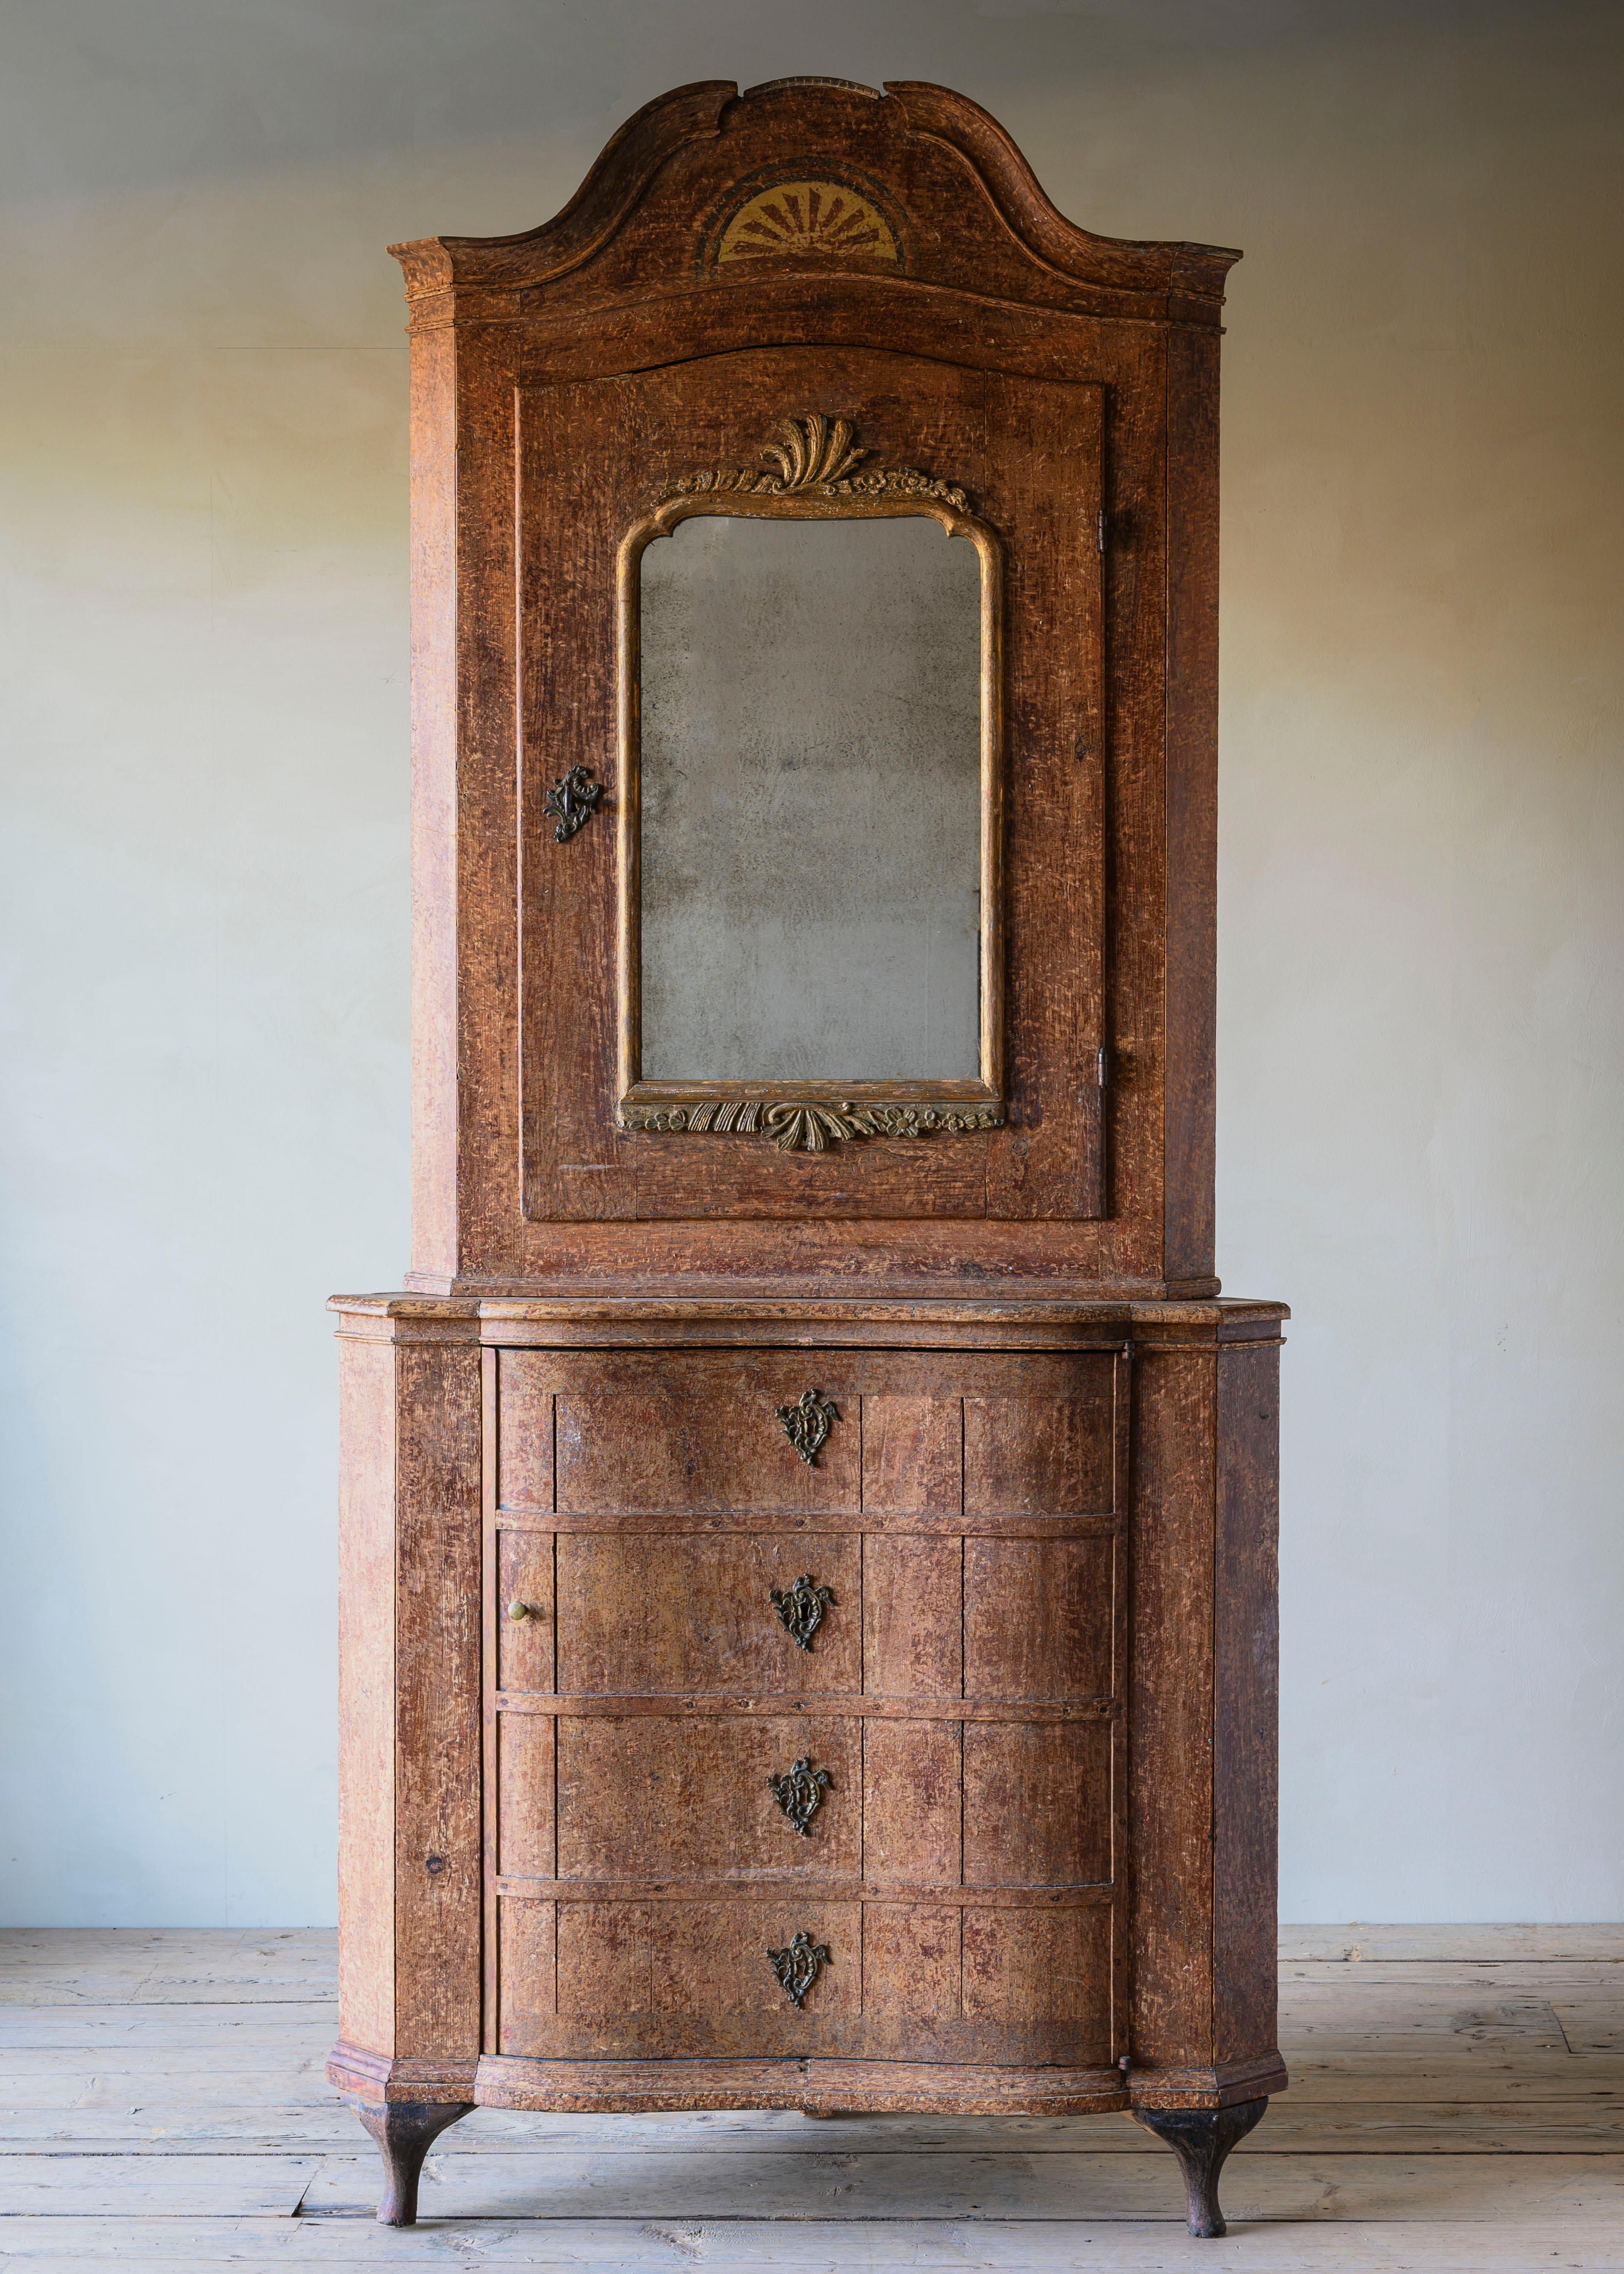 Exceptional and unusually large 18th century mercury mirrored Rococo corner cabinet in its original condition with a wonderful patination, Ca 1770 Scandinavia. Most likely Denmark, possibly south Swedish.